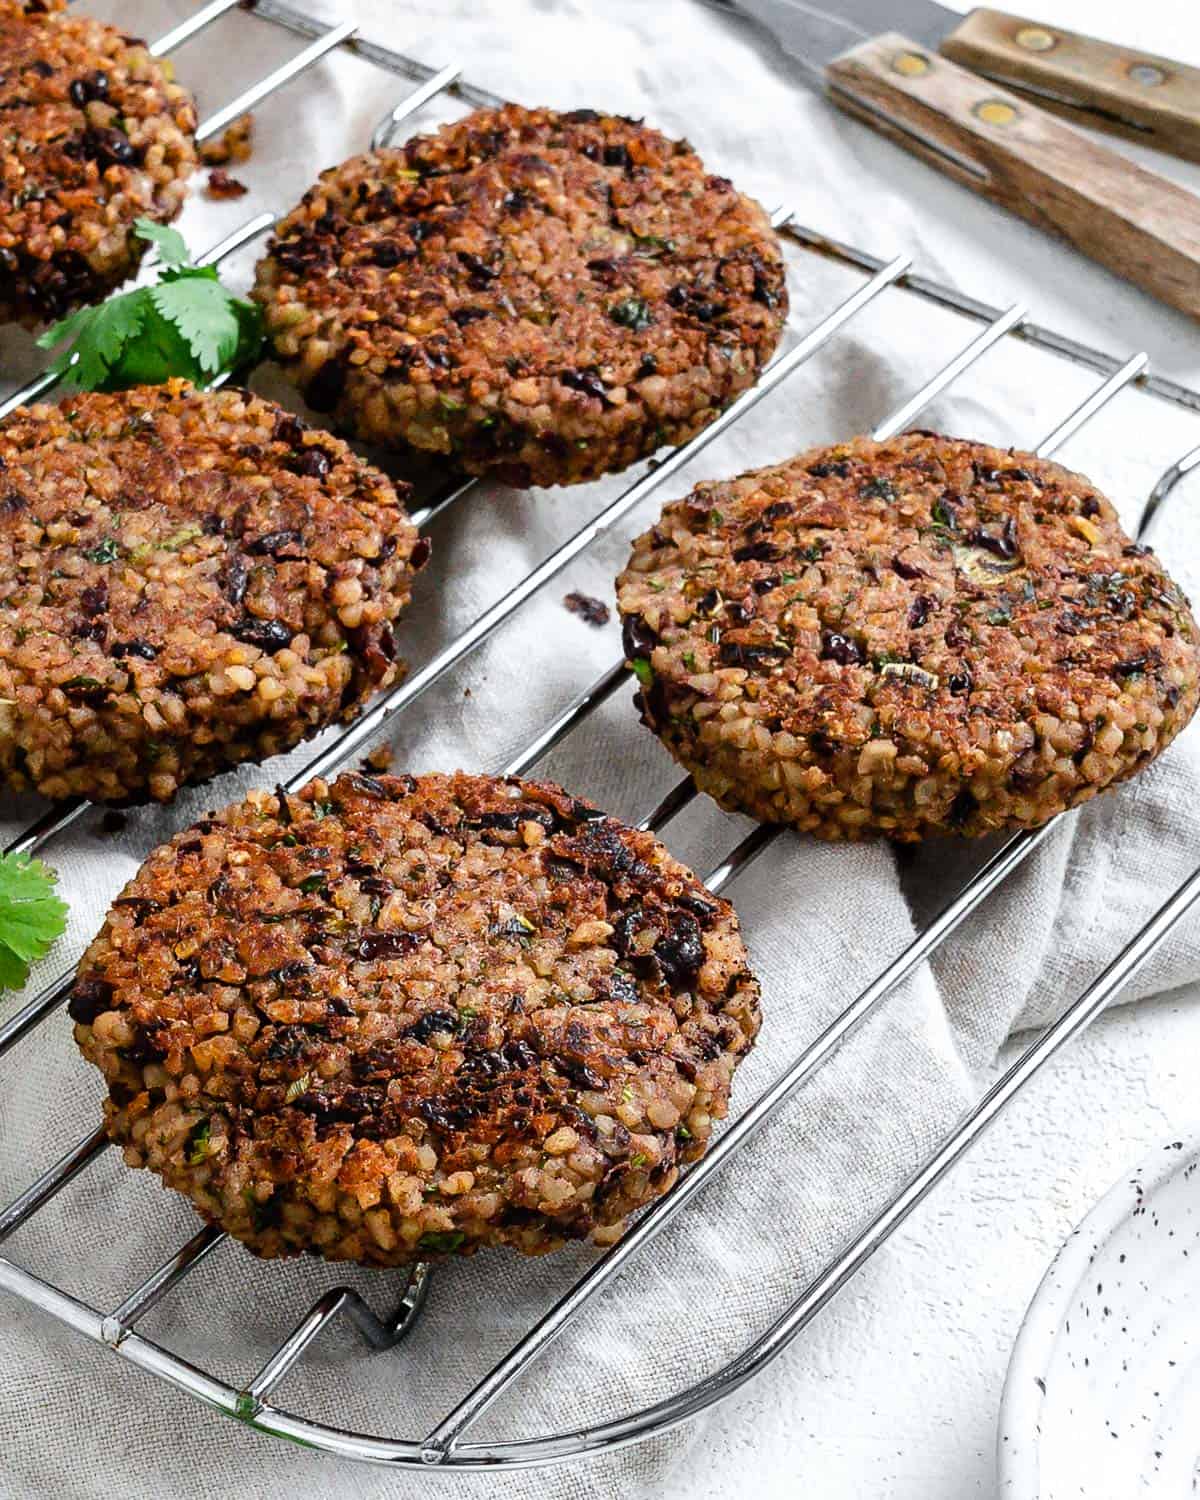 completed Vegan Black Bean and Bulgur Burgers on a wire rack a،nst a light surface